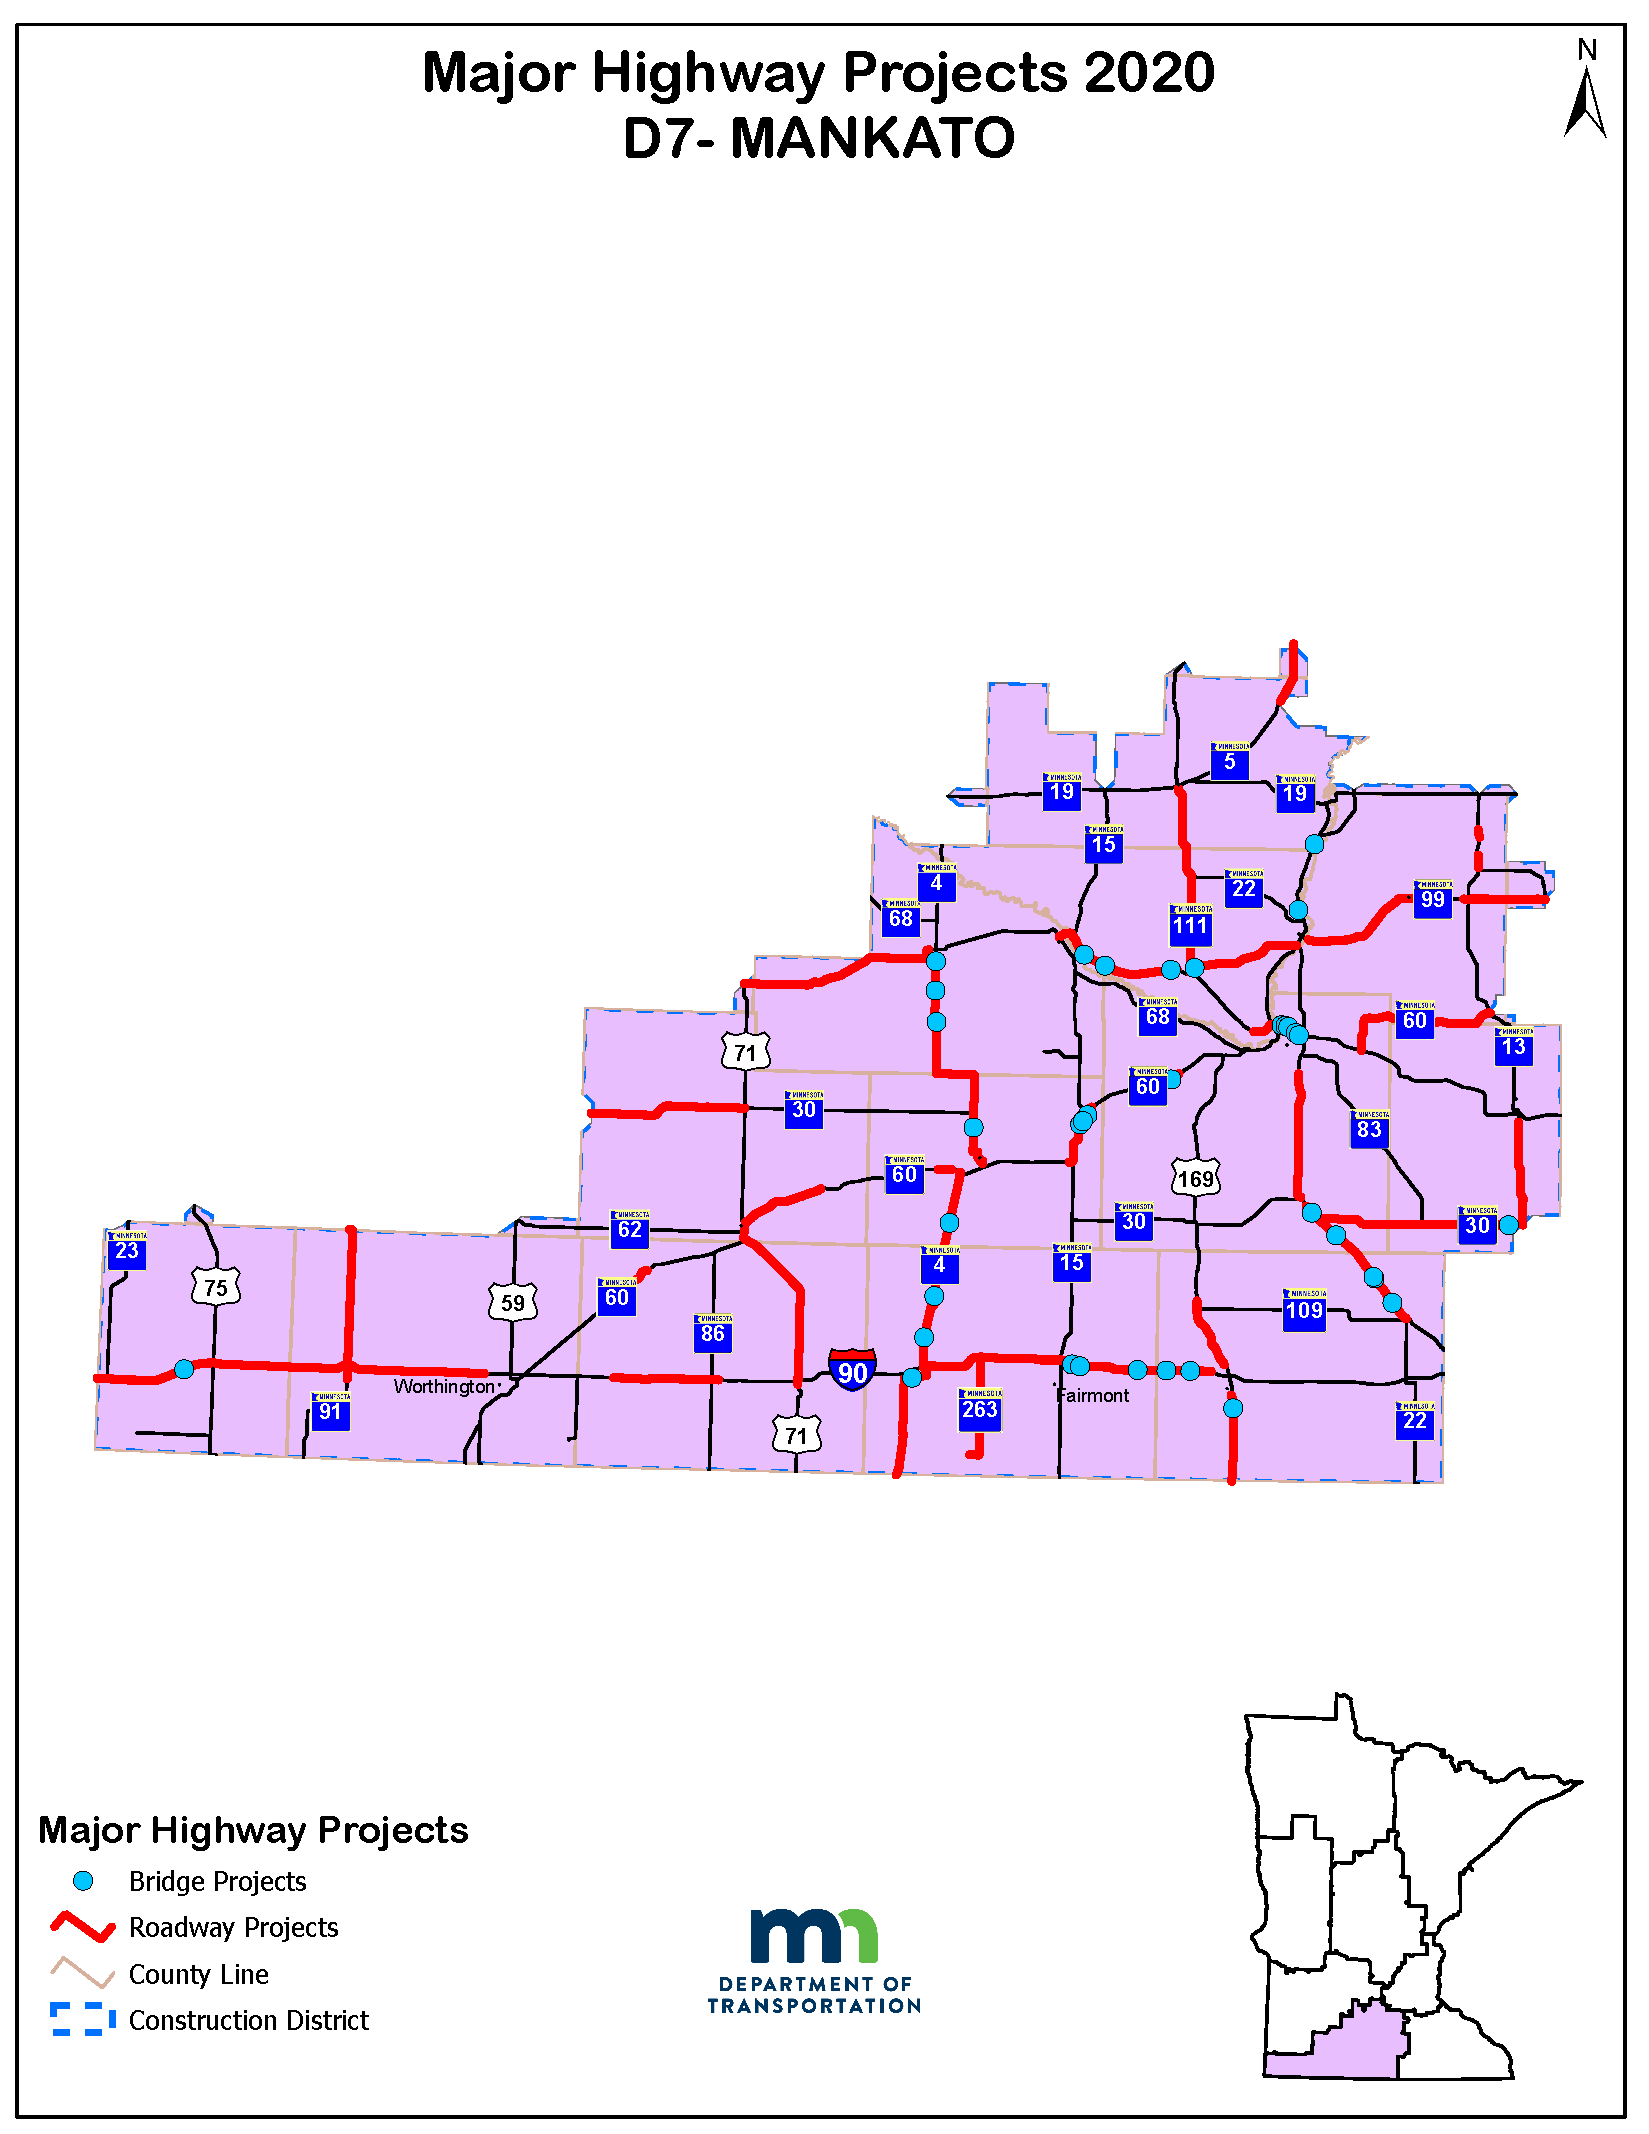 Map of major projects in MnDOT District 7